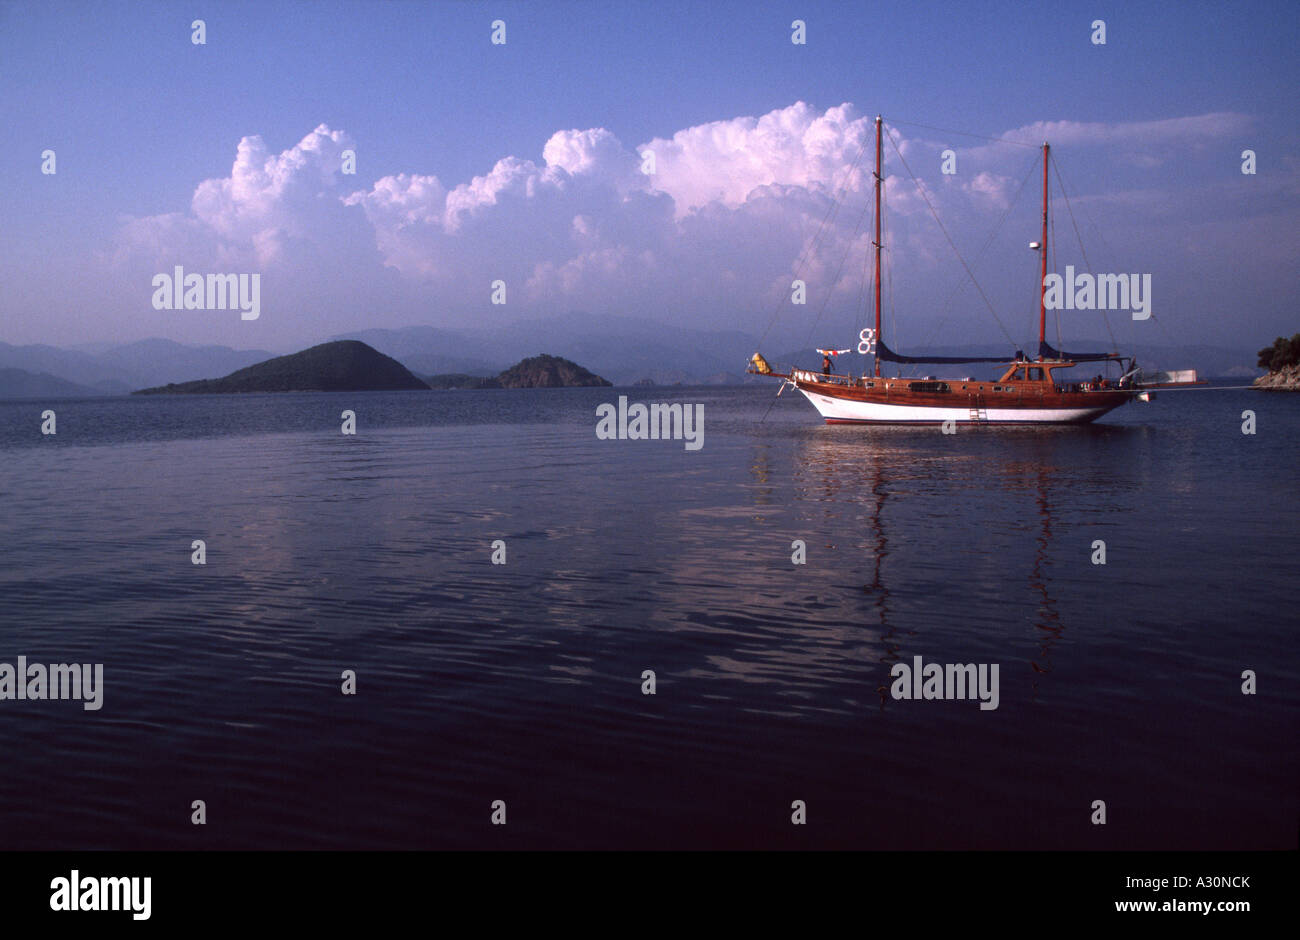 Moored wooden tour boat on a Blue Cruise Fethiye Bay South Turkey Stock Photo